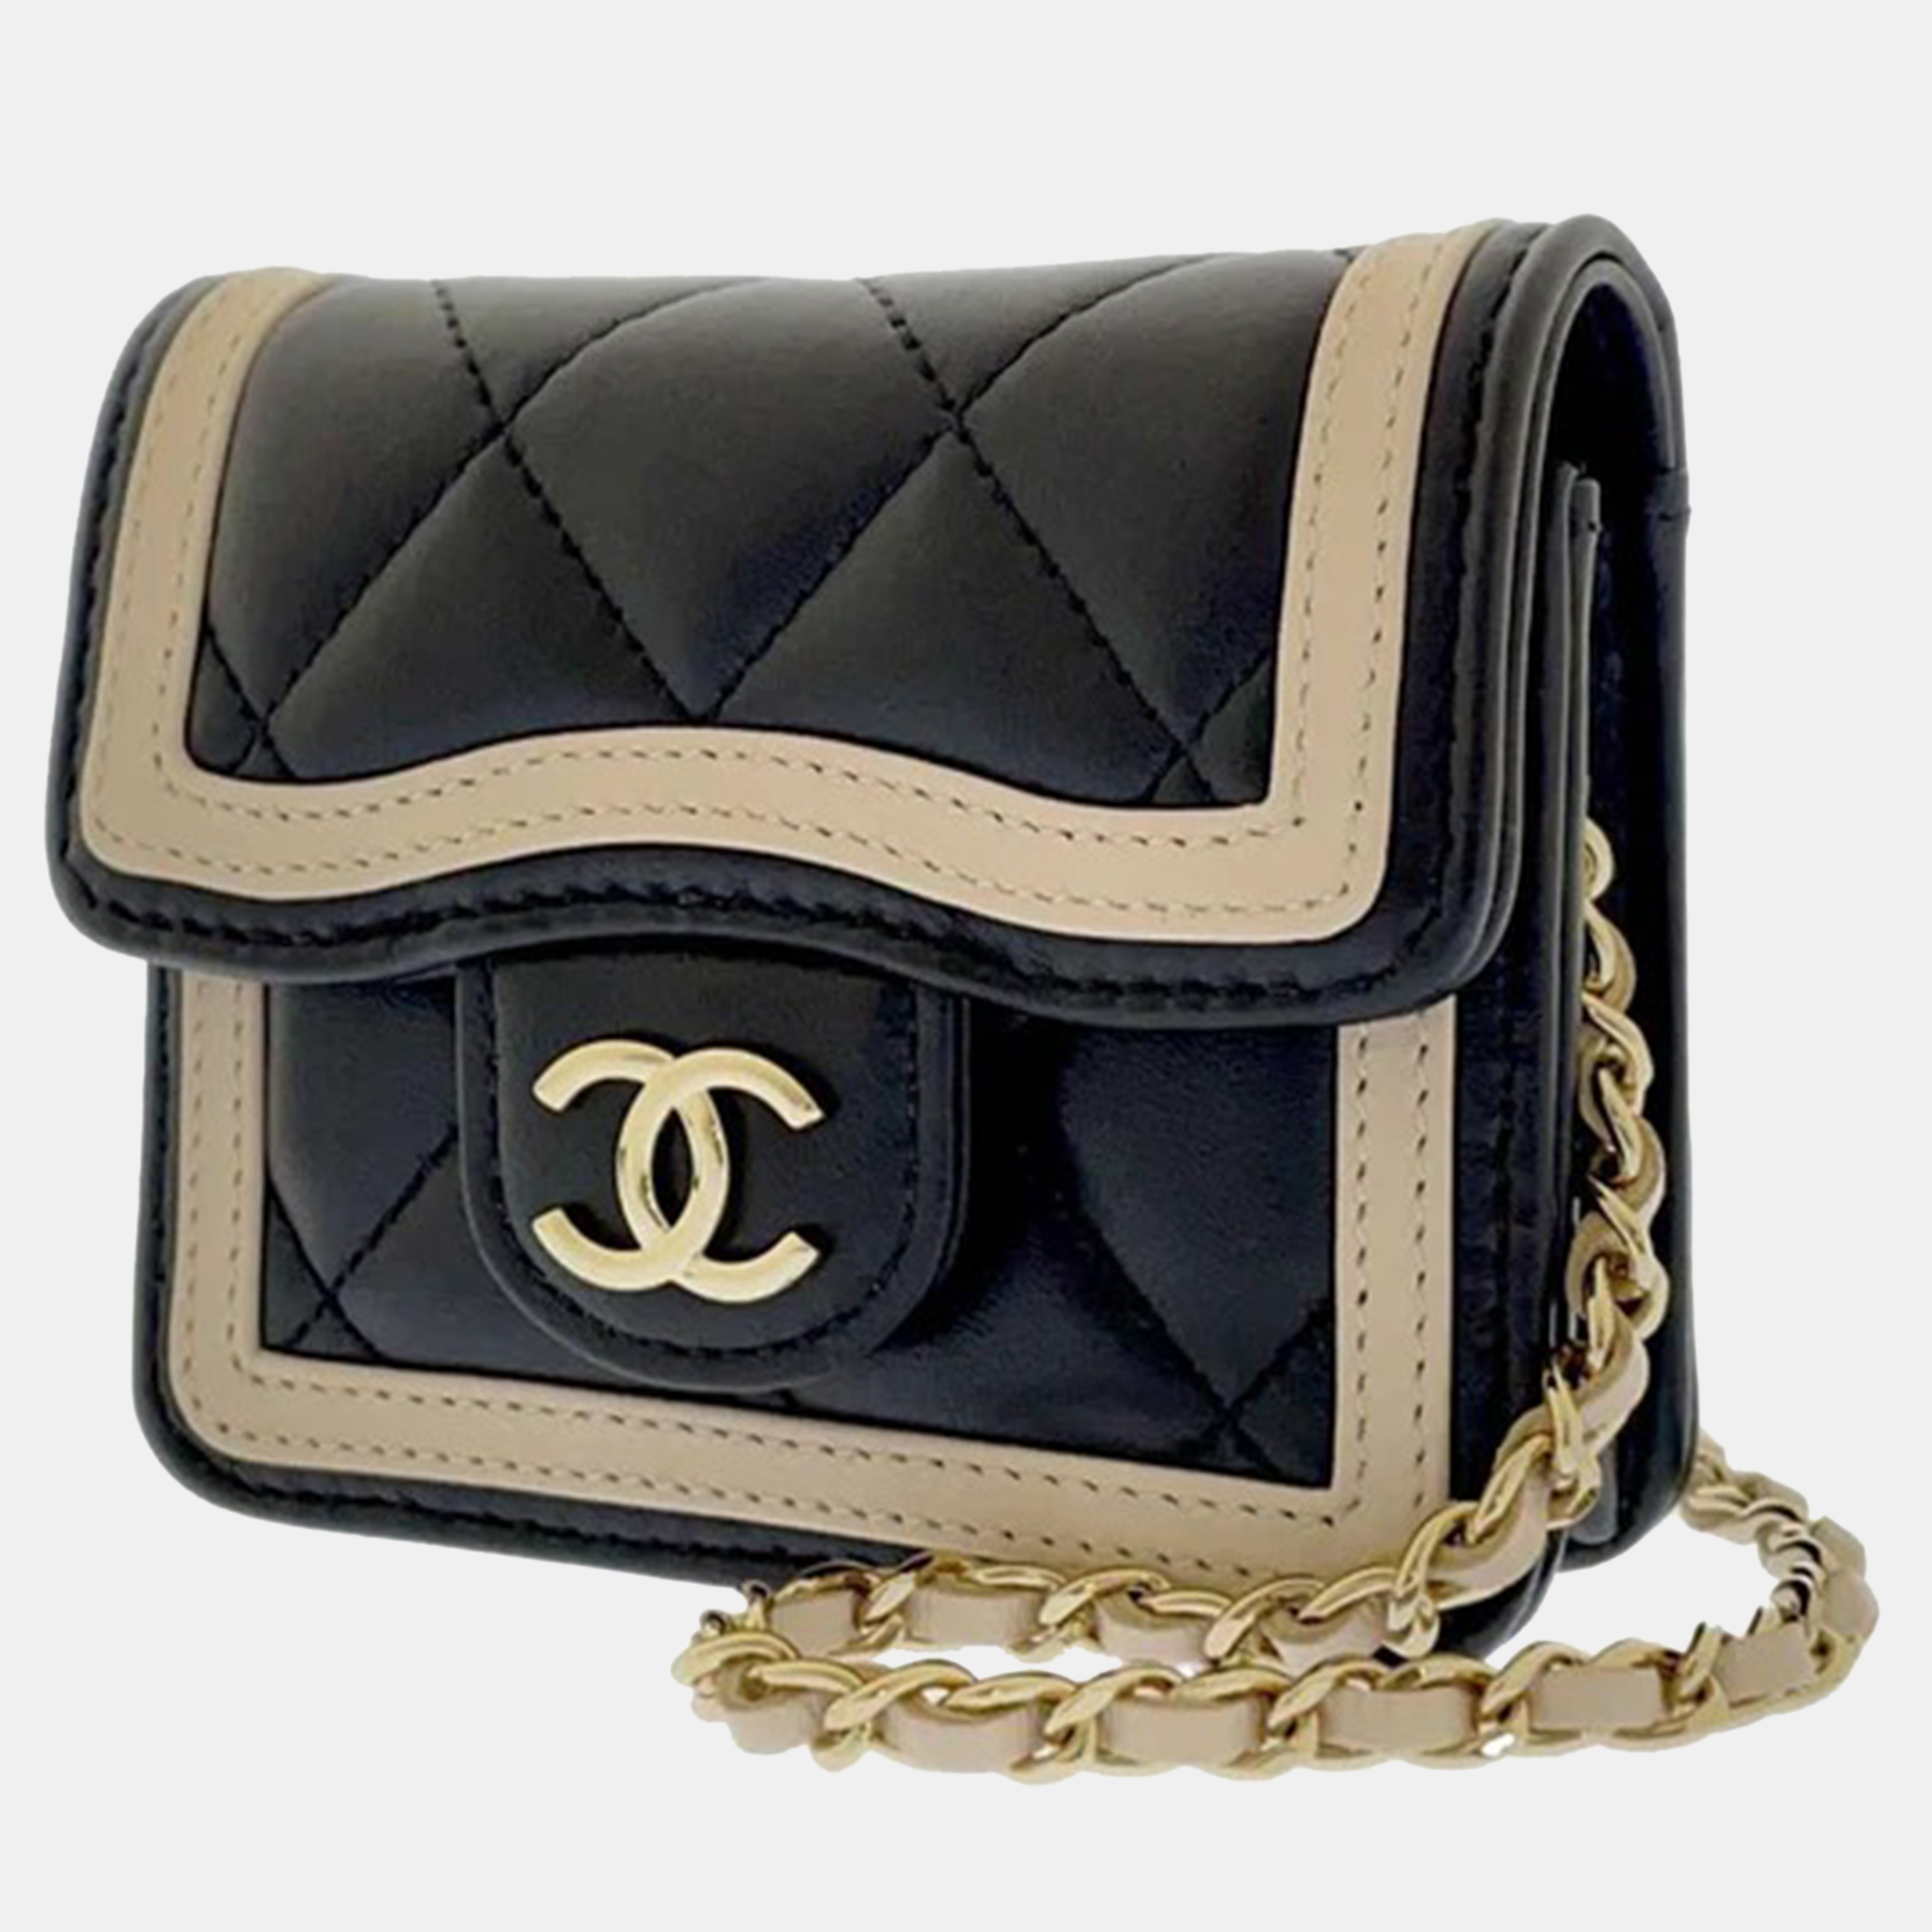 

CHANEL Black/Beige Quilted Lambskin Leather Clutch with Chain